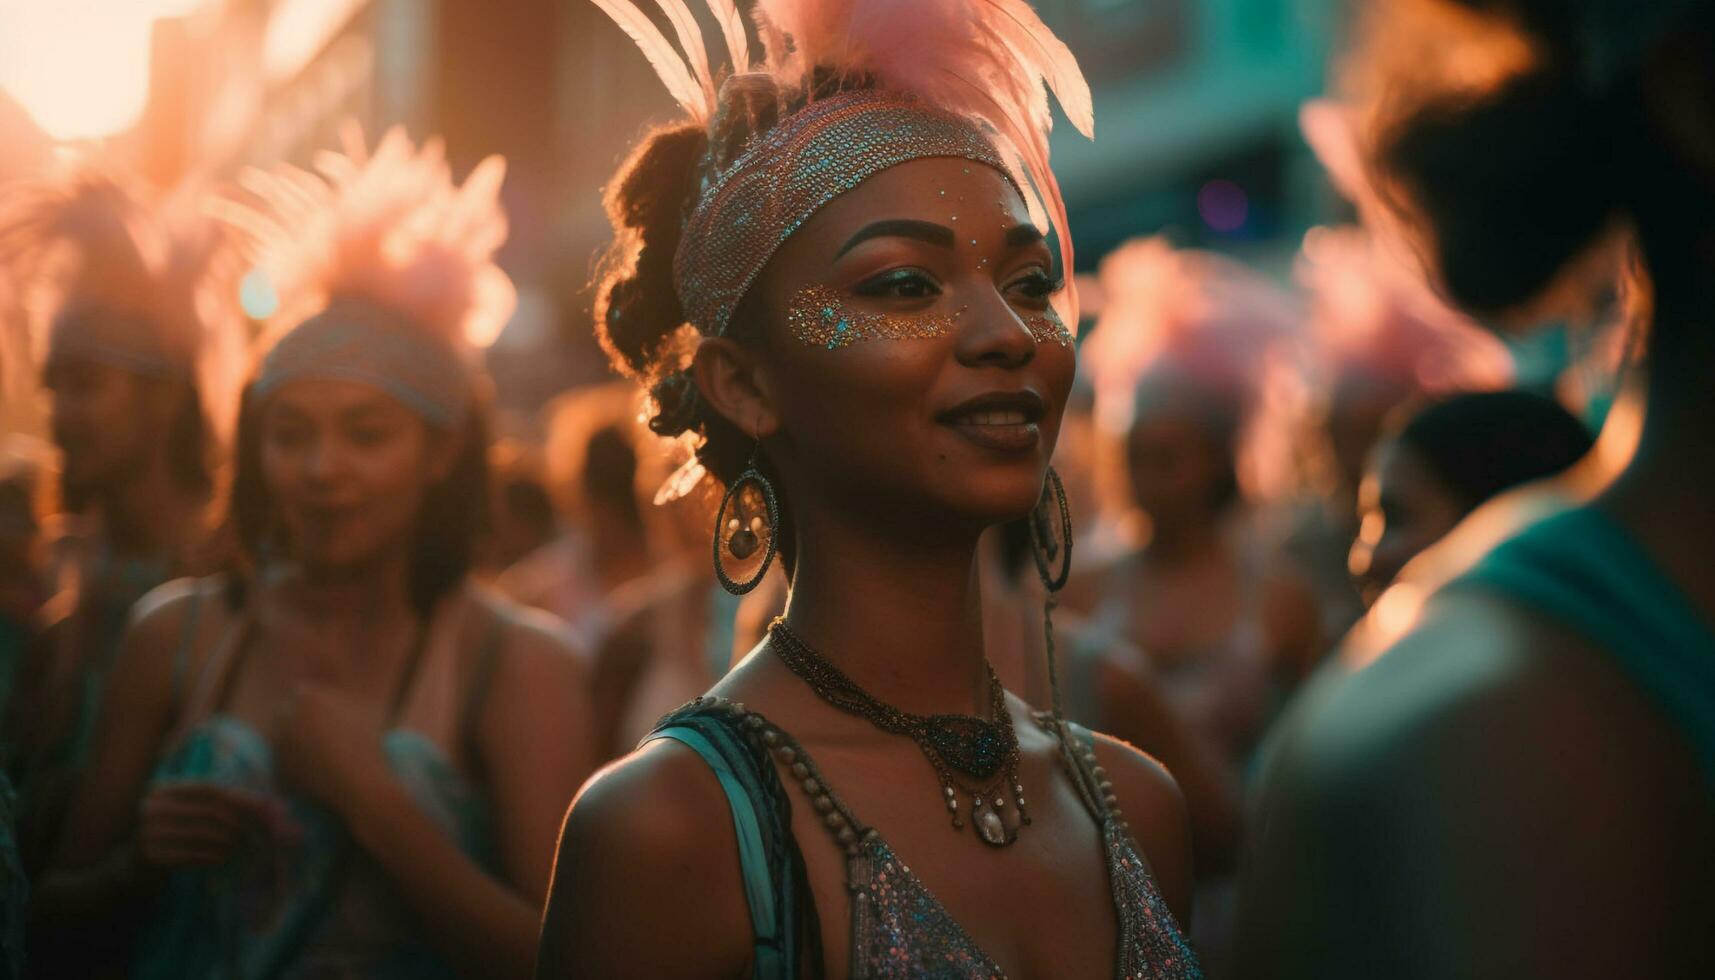 Young adults dancing, smiling, carefree at music festival generated by AI photo